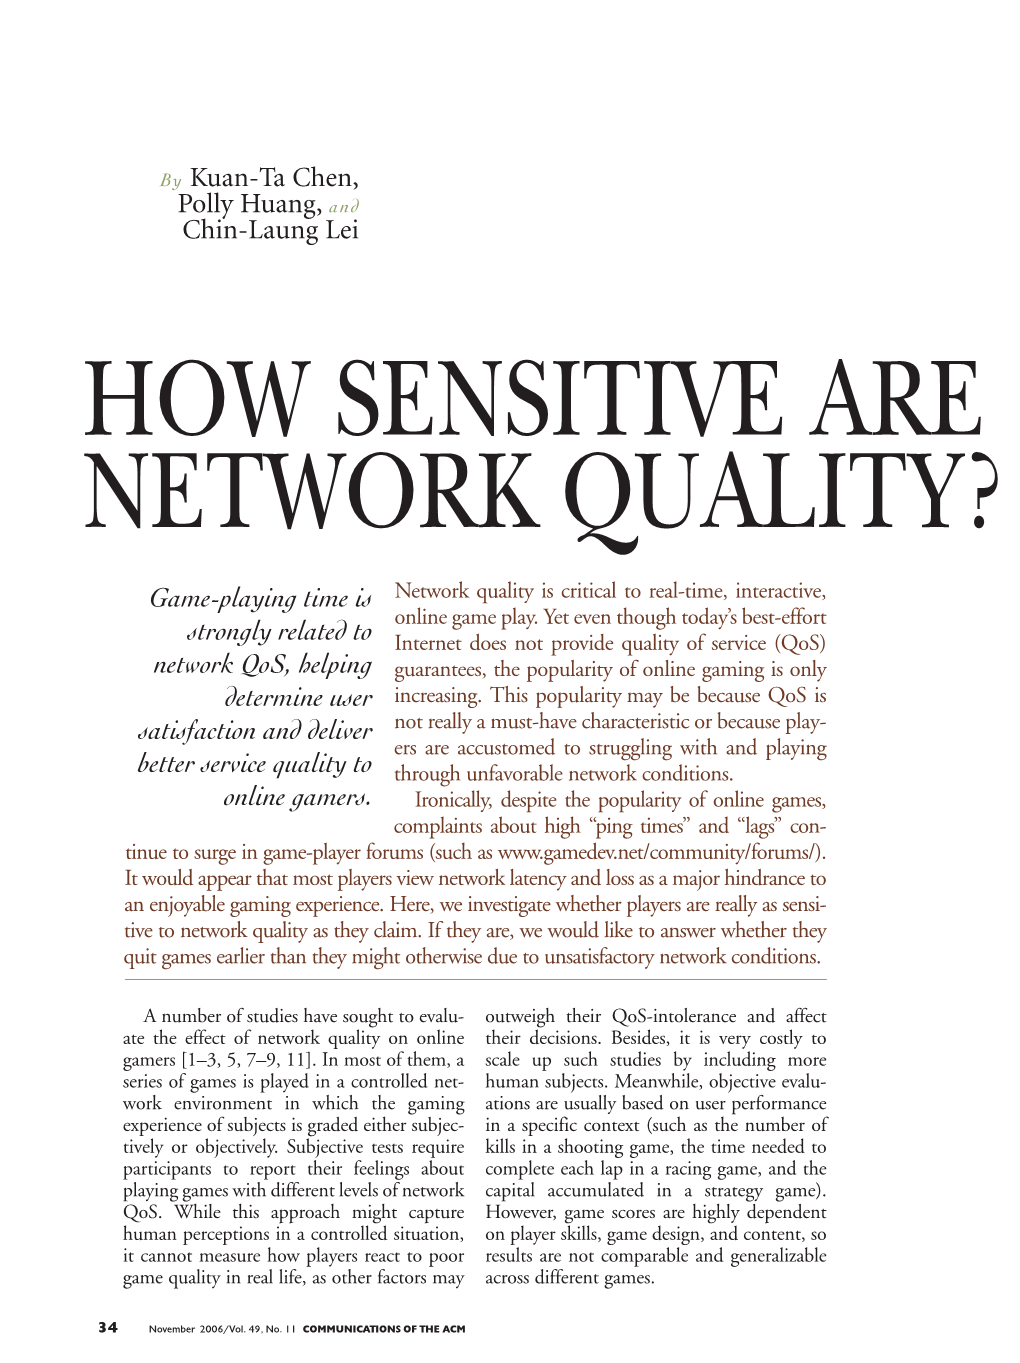 How Sensitive Are Online Gam Network Quality?